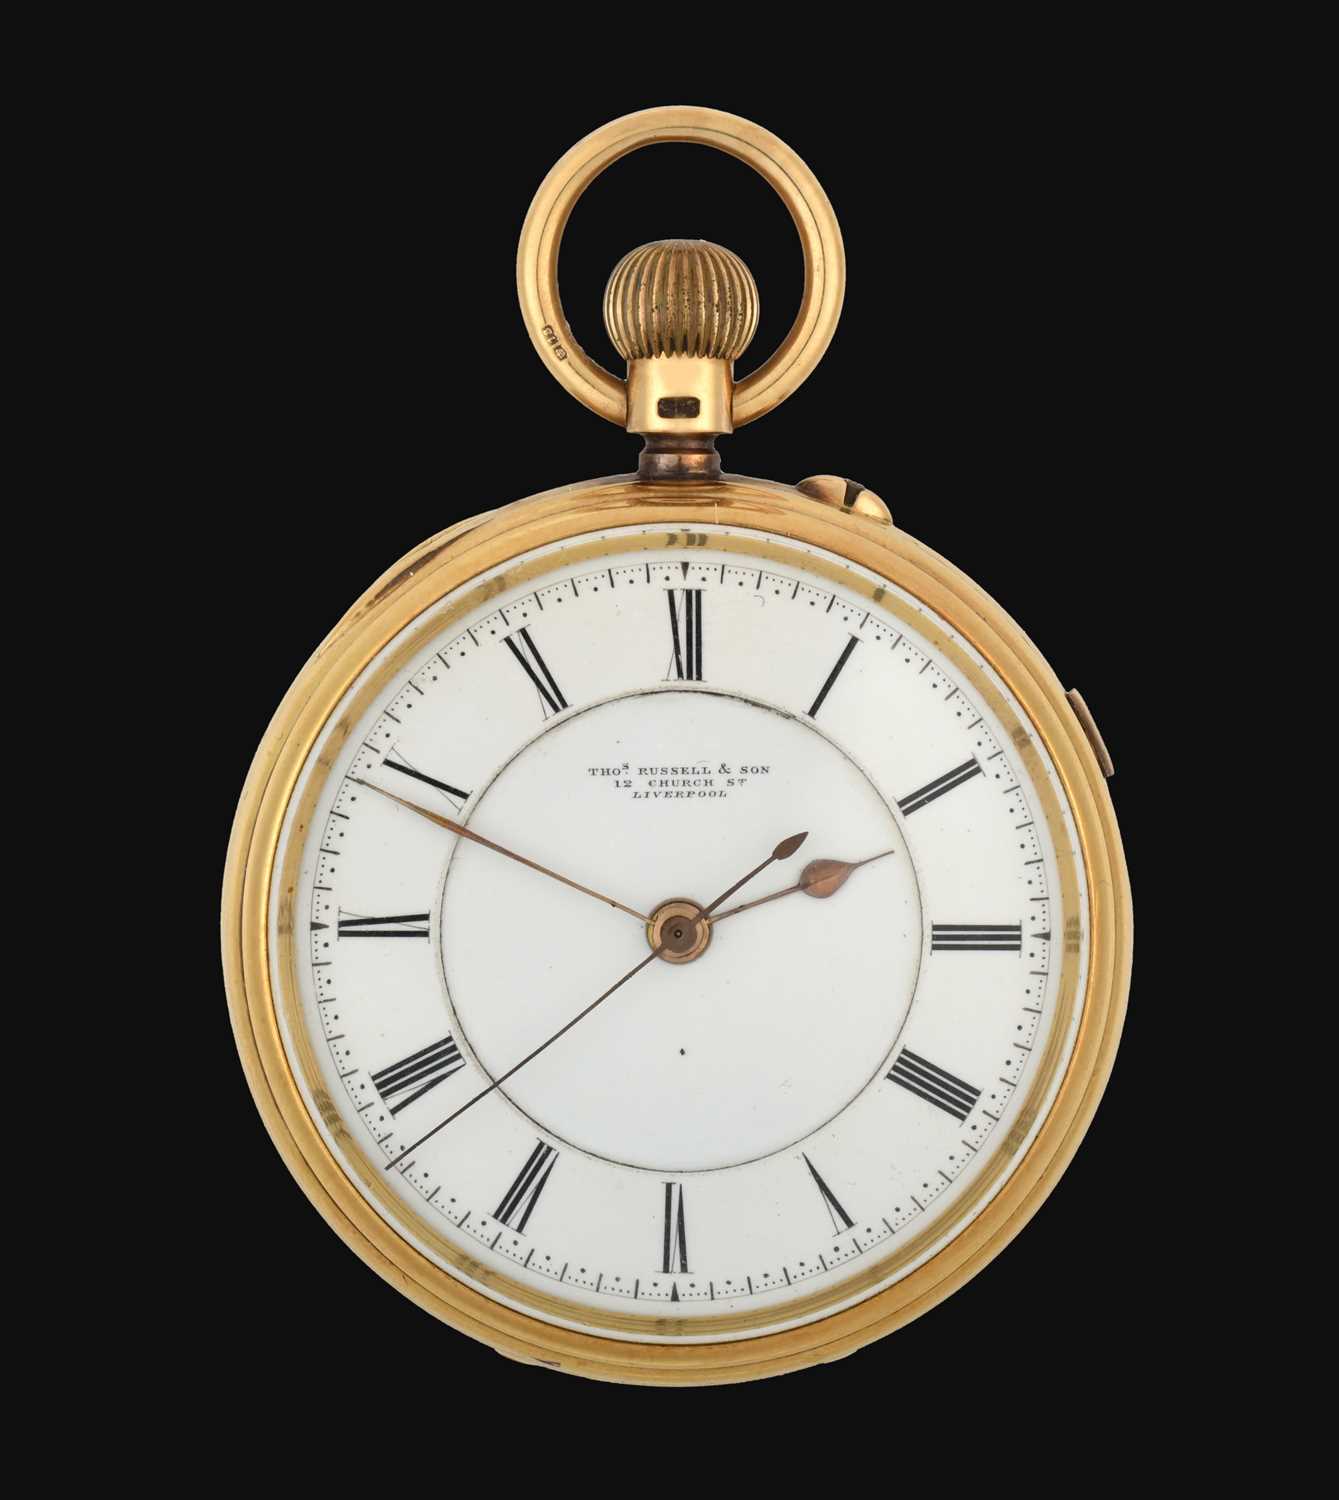 Russell & Son: An 18 Carat Gold Chronograph Pocket Watch Sold with the Original Warranty Paperwork s